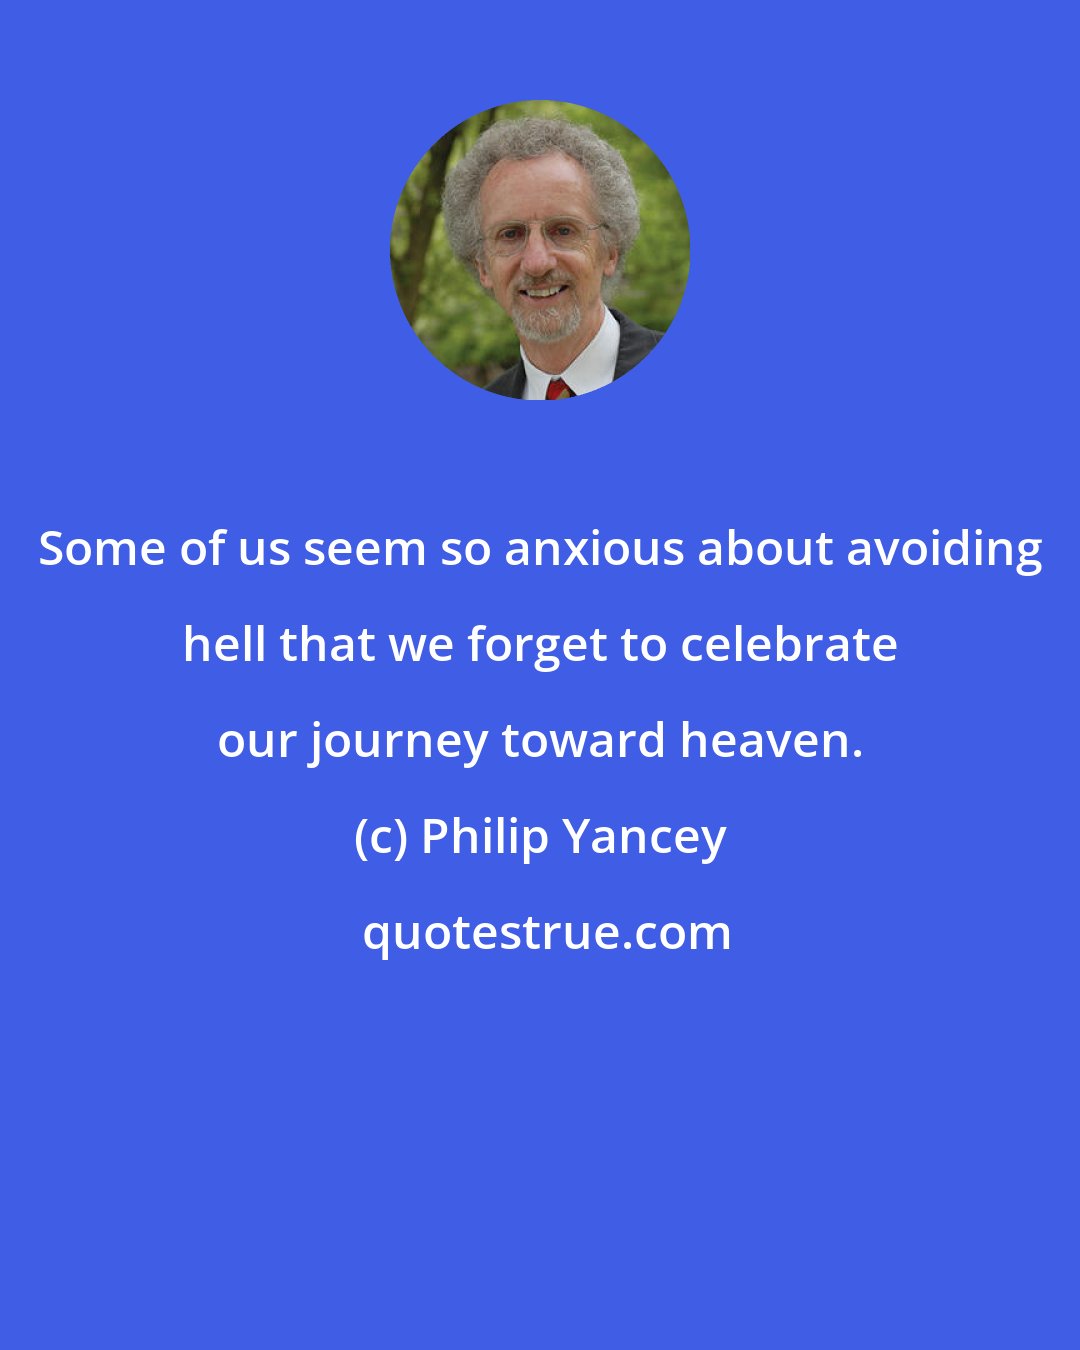 Philip Yancey: Some of us seem so anxious about avoiding hell that we forget to celebrate our journey toward heaven.